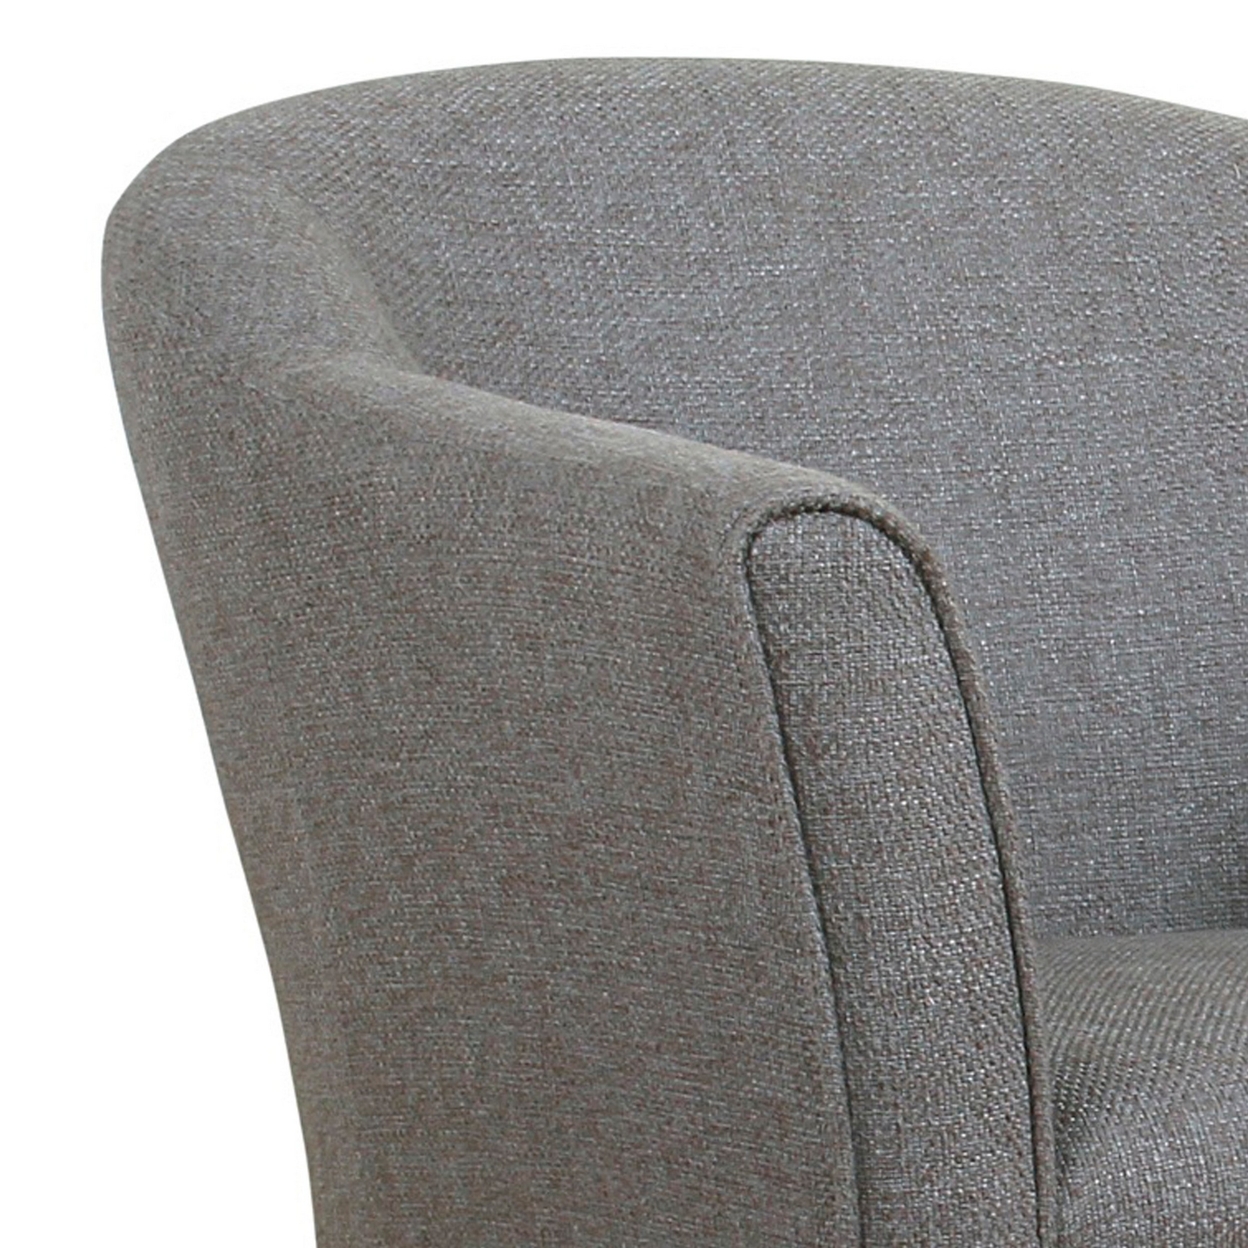 Fabric Upholstered Wooden Accent Chair With Barrel Style Back, Gray And Brown- Saltoro Sherpi